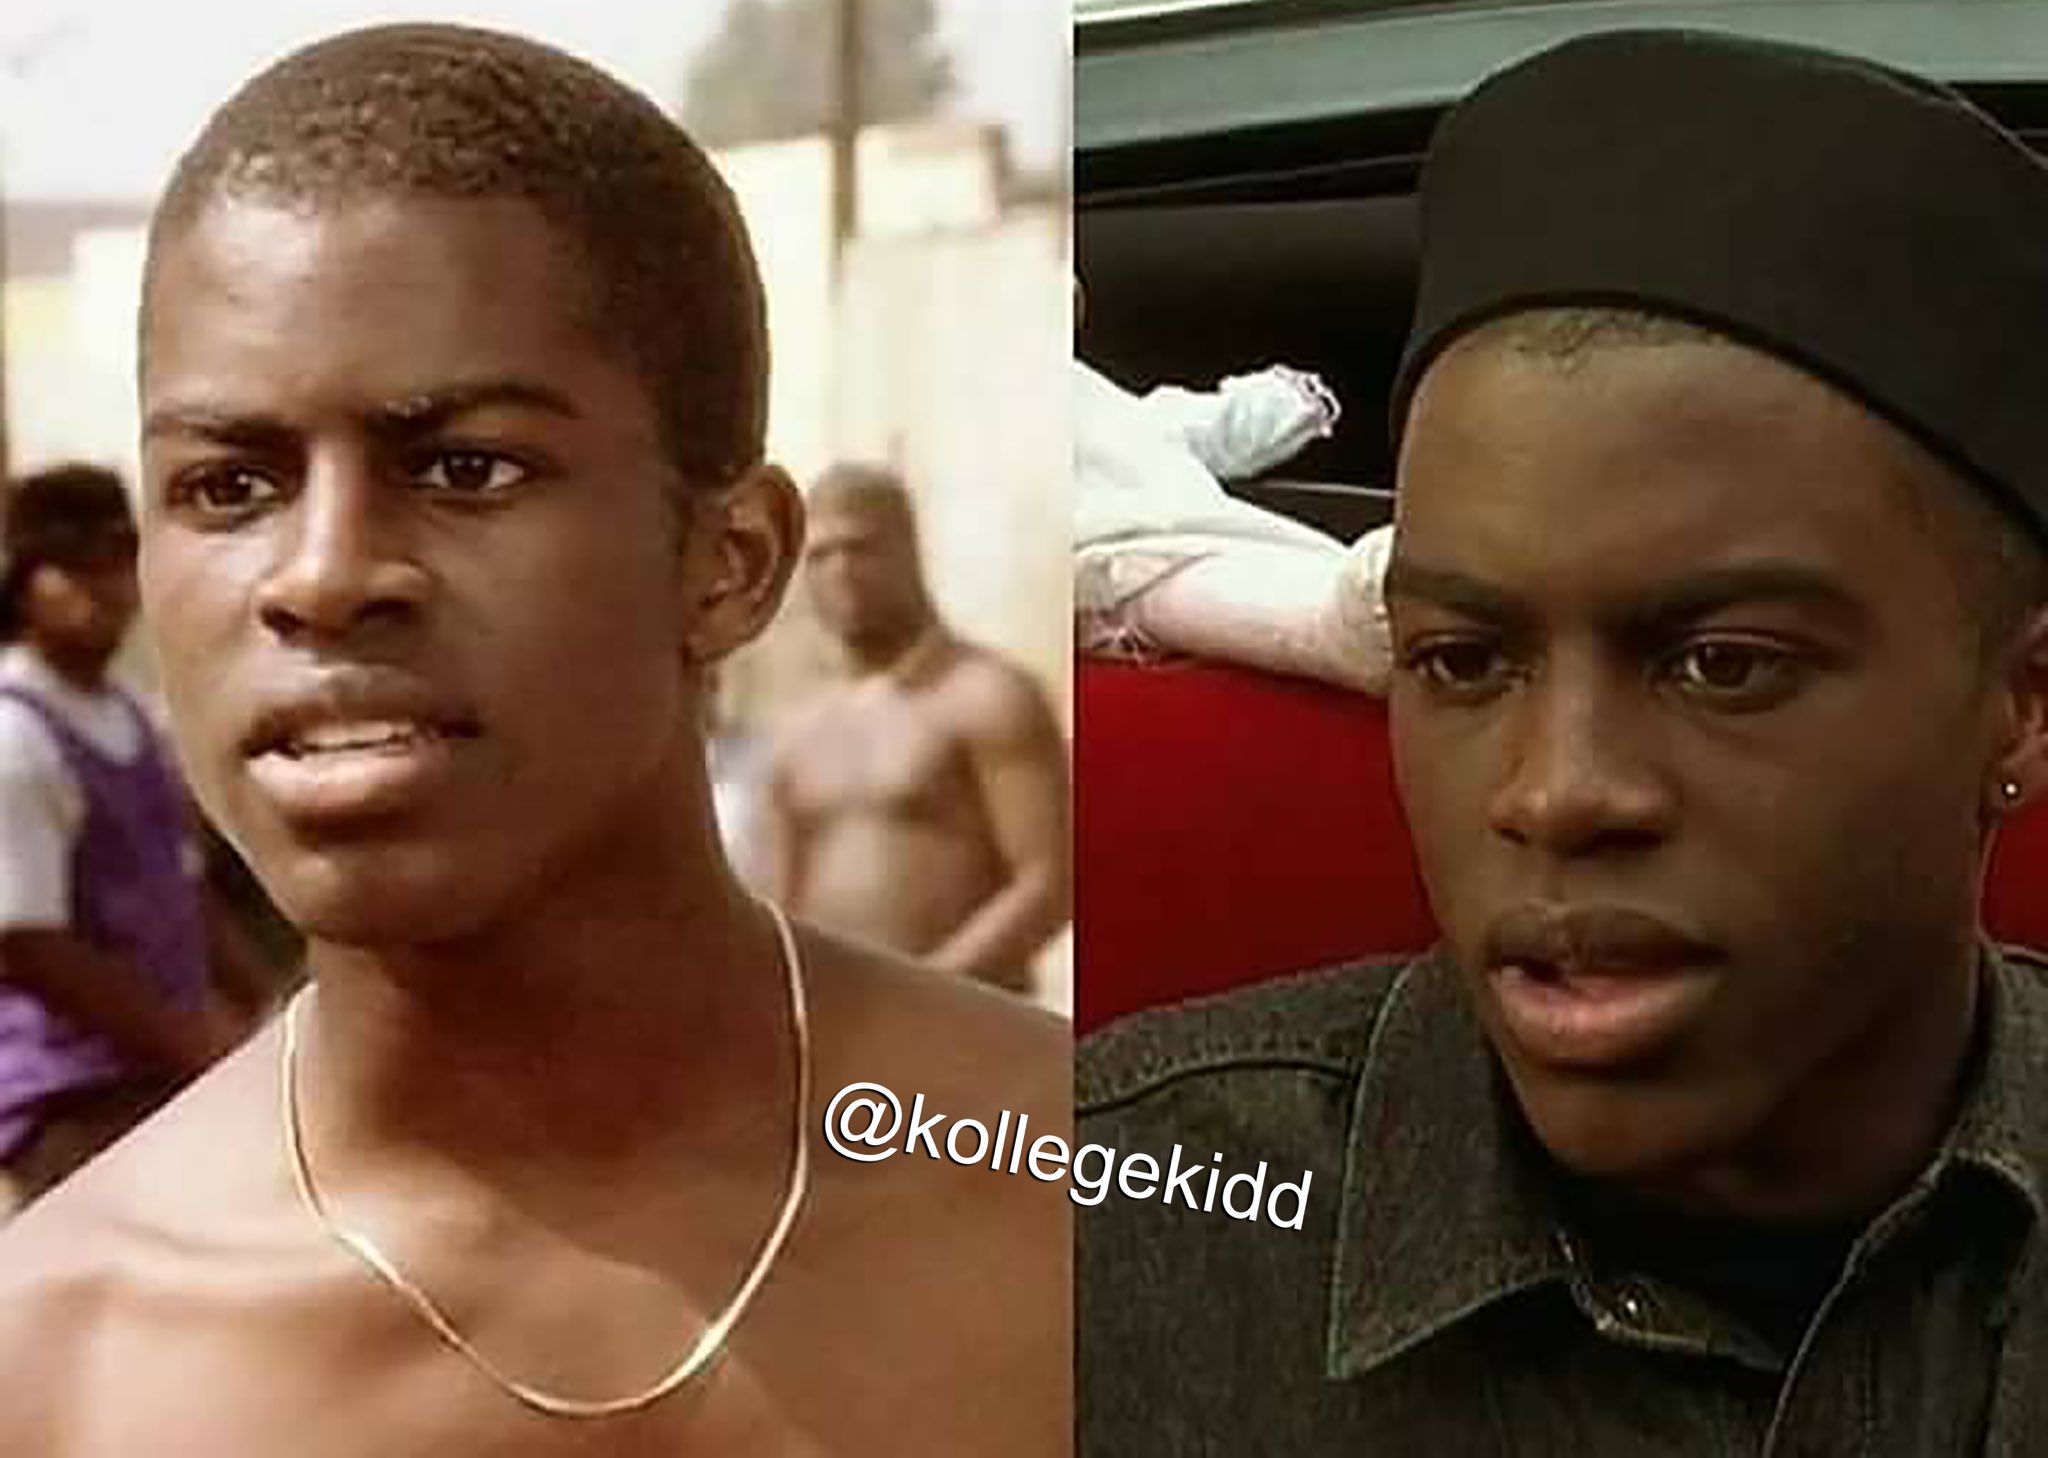 Menace II Society cast: Where are they now?